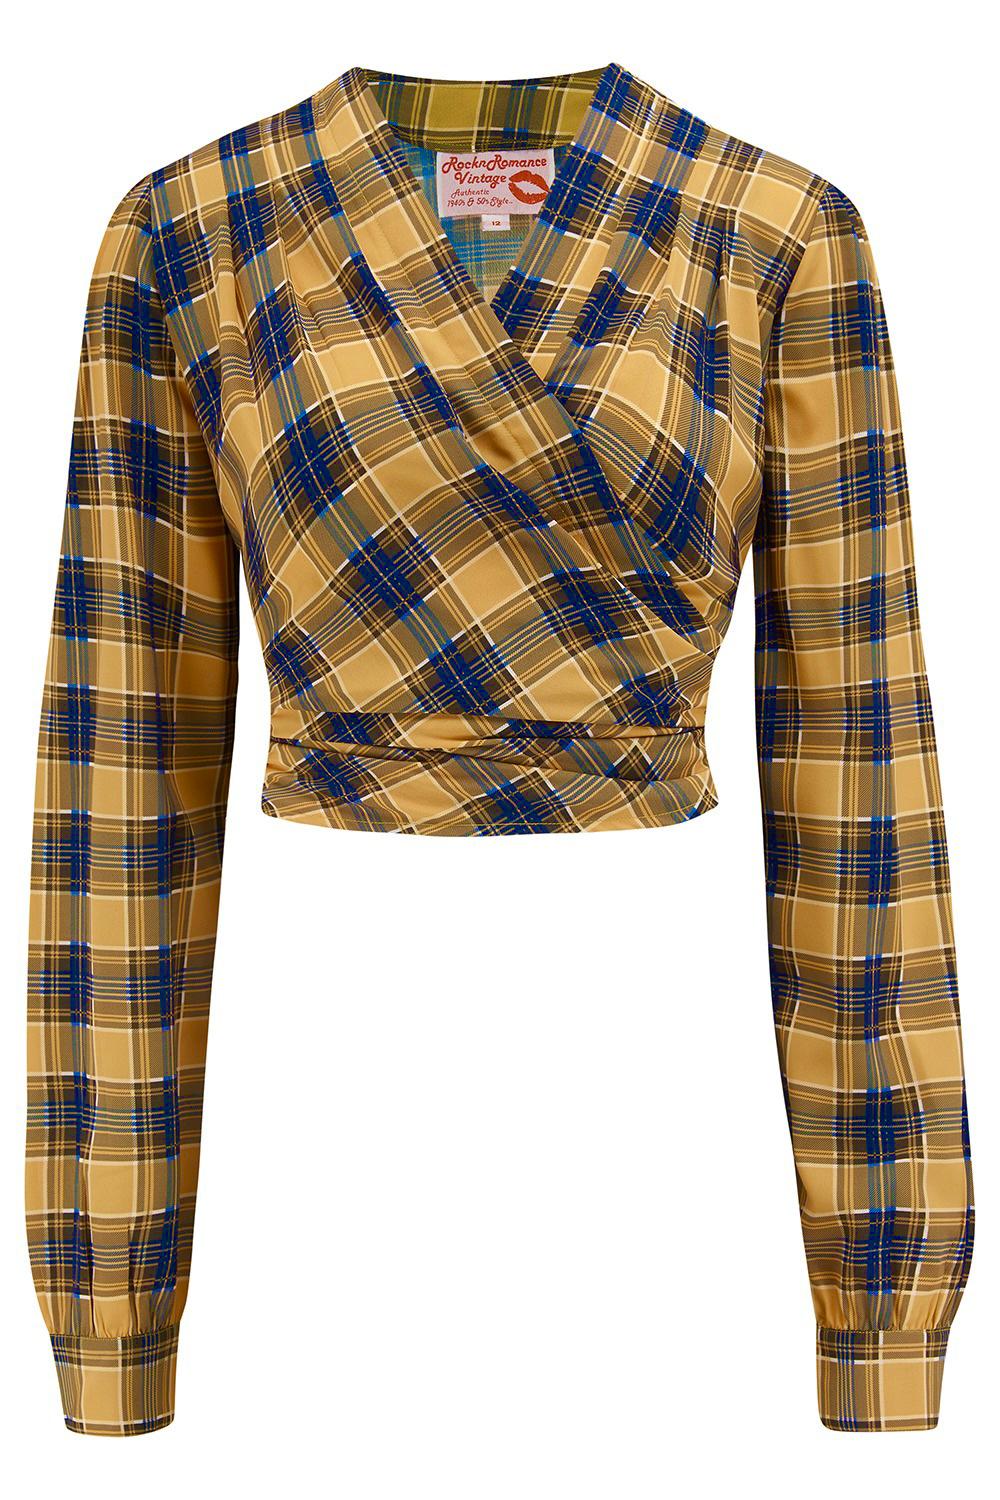 The "Darla" Long Sleeve Wrap Blouse in Mustard & Navy Check Print, True Vintage Style - True and authentic vintage style clothing, inspired by the Classic styles of CC41 , WW2 and the fun 1950s RocknRoll era, for everyday wear plus events like Goodwood Revival, Twinwood Festival and Viva Las Vegas Rockabilly Weekend Rock n Romance Rock n Romance